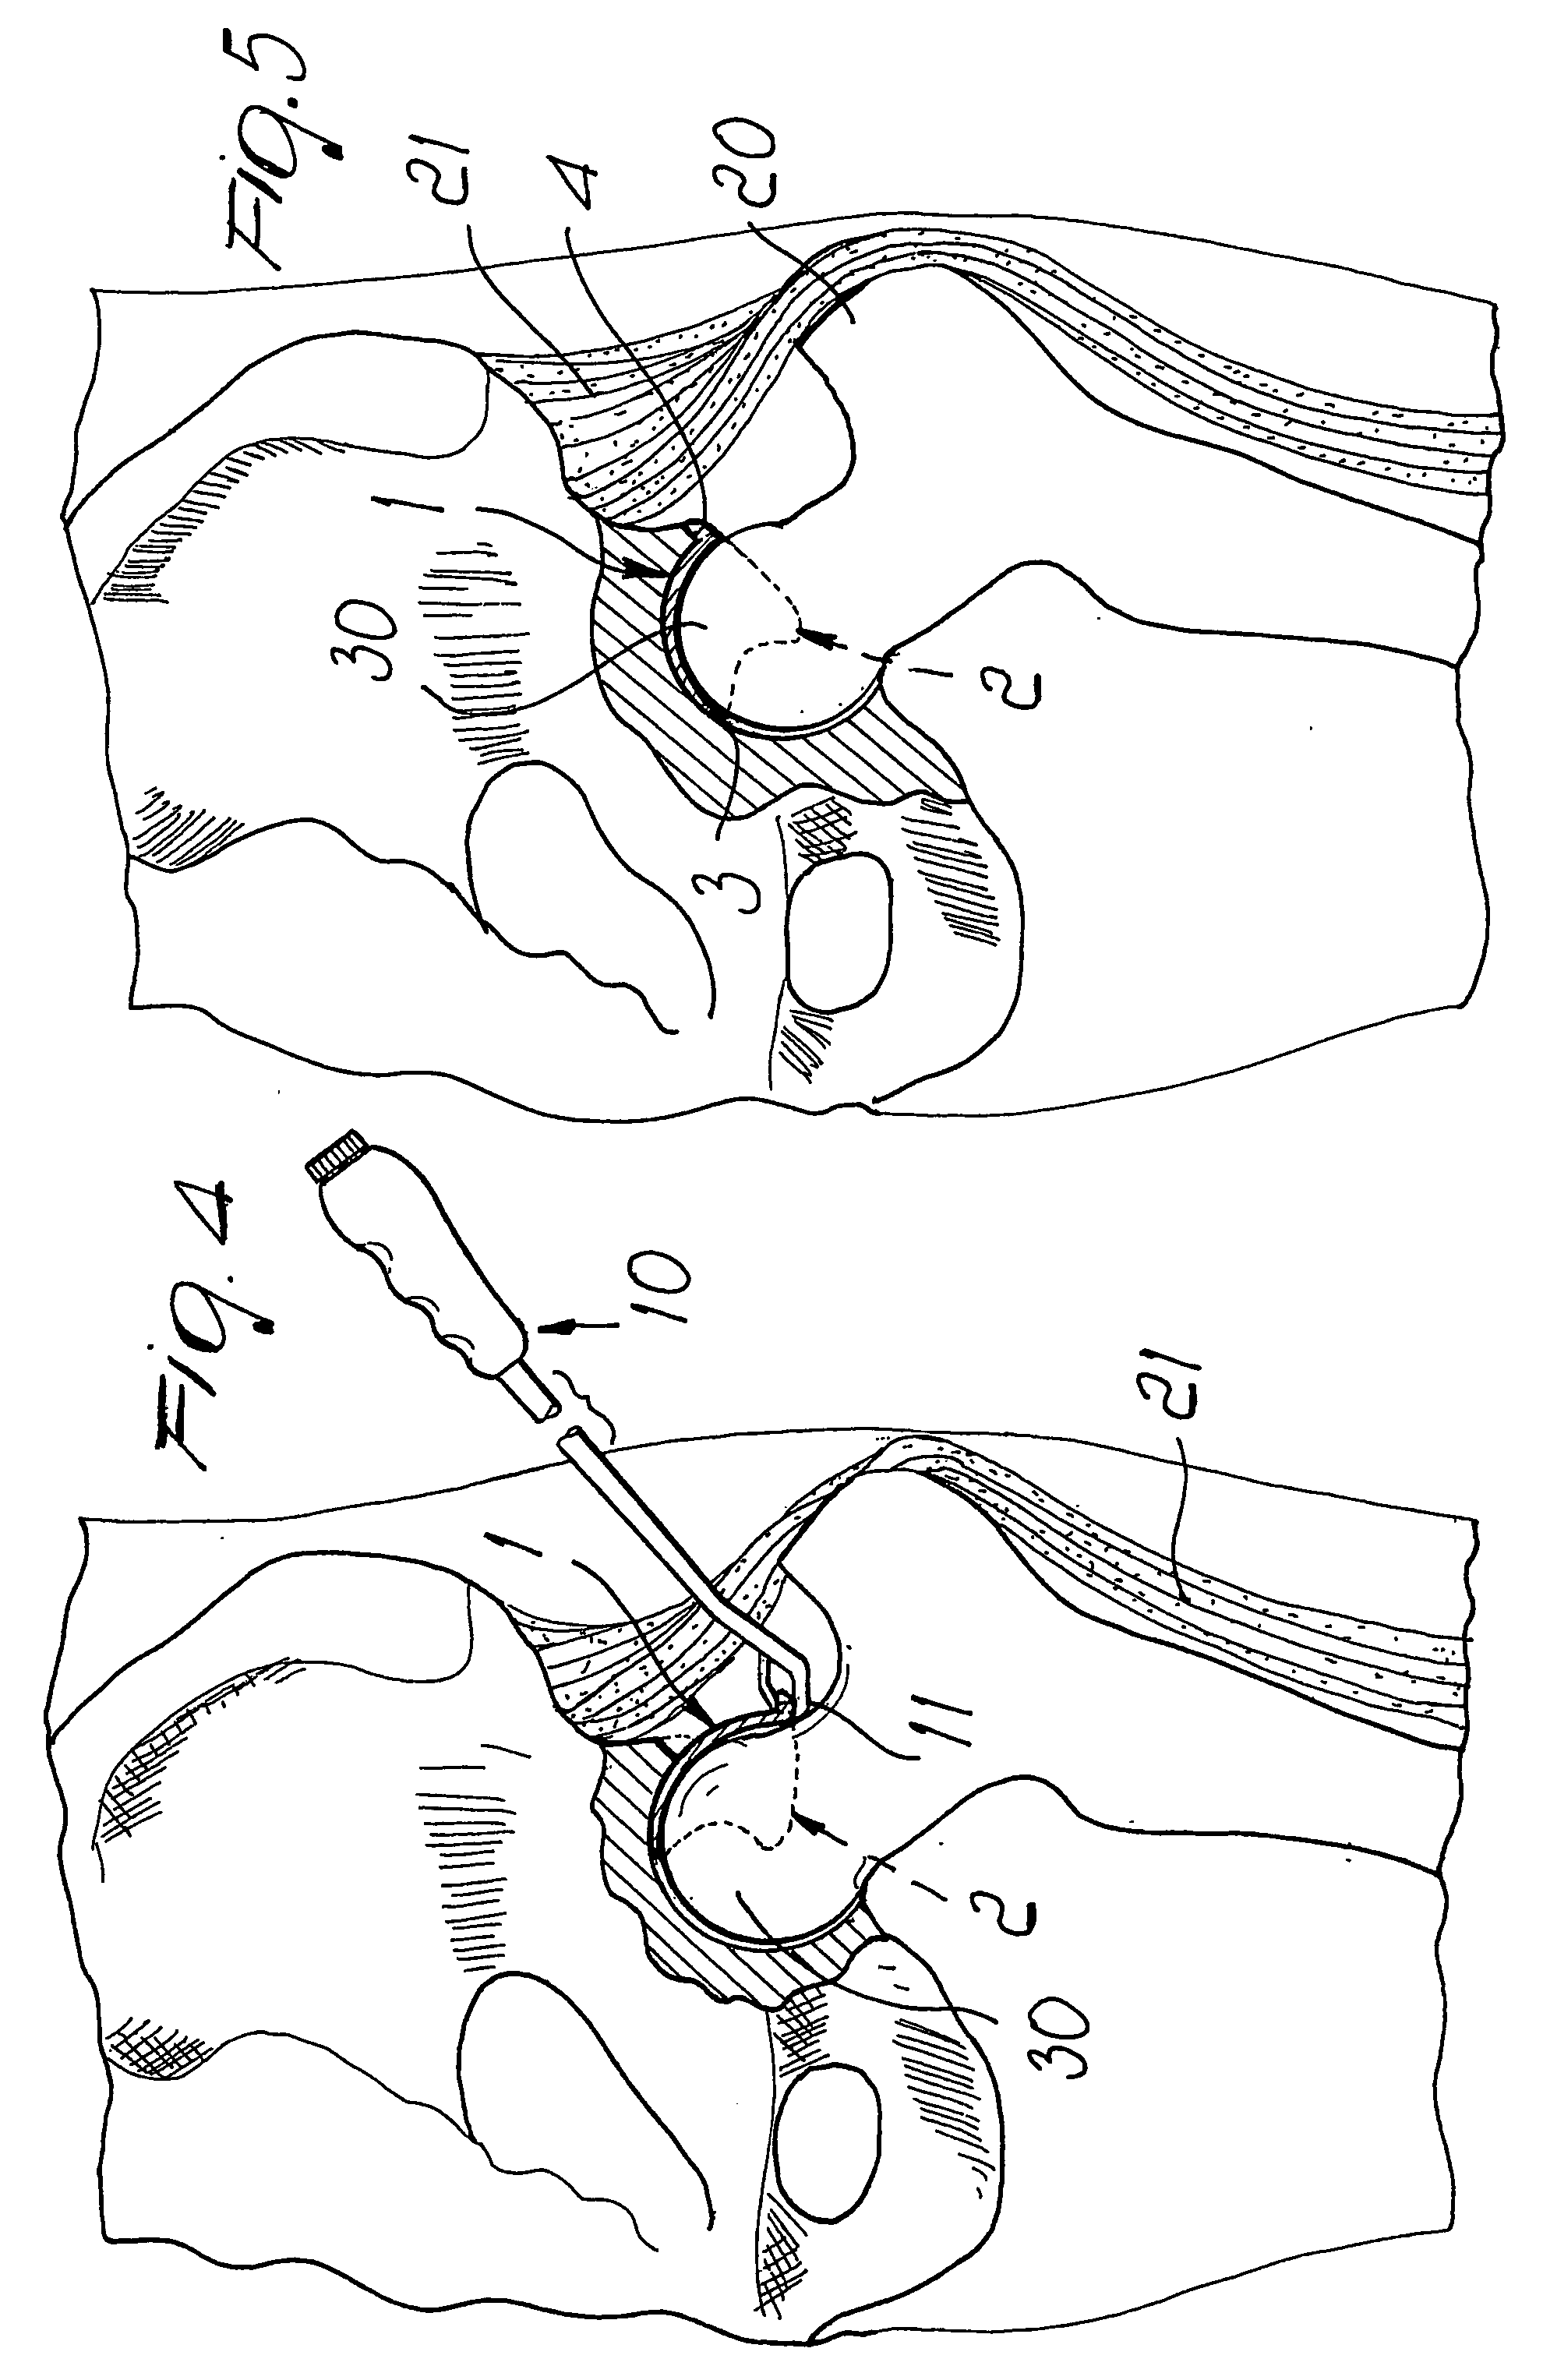 Corrective element for the articulation between the femur and the pelvis